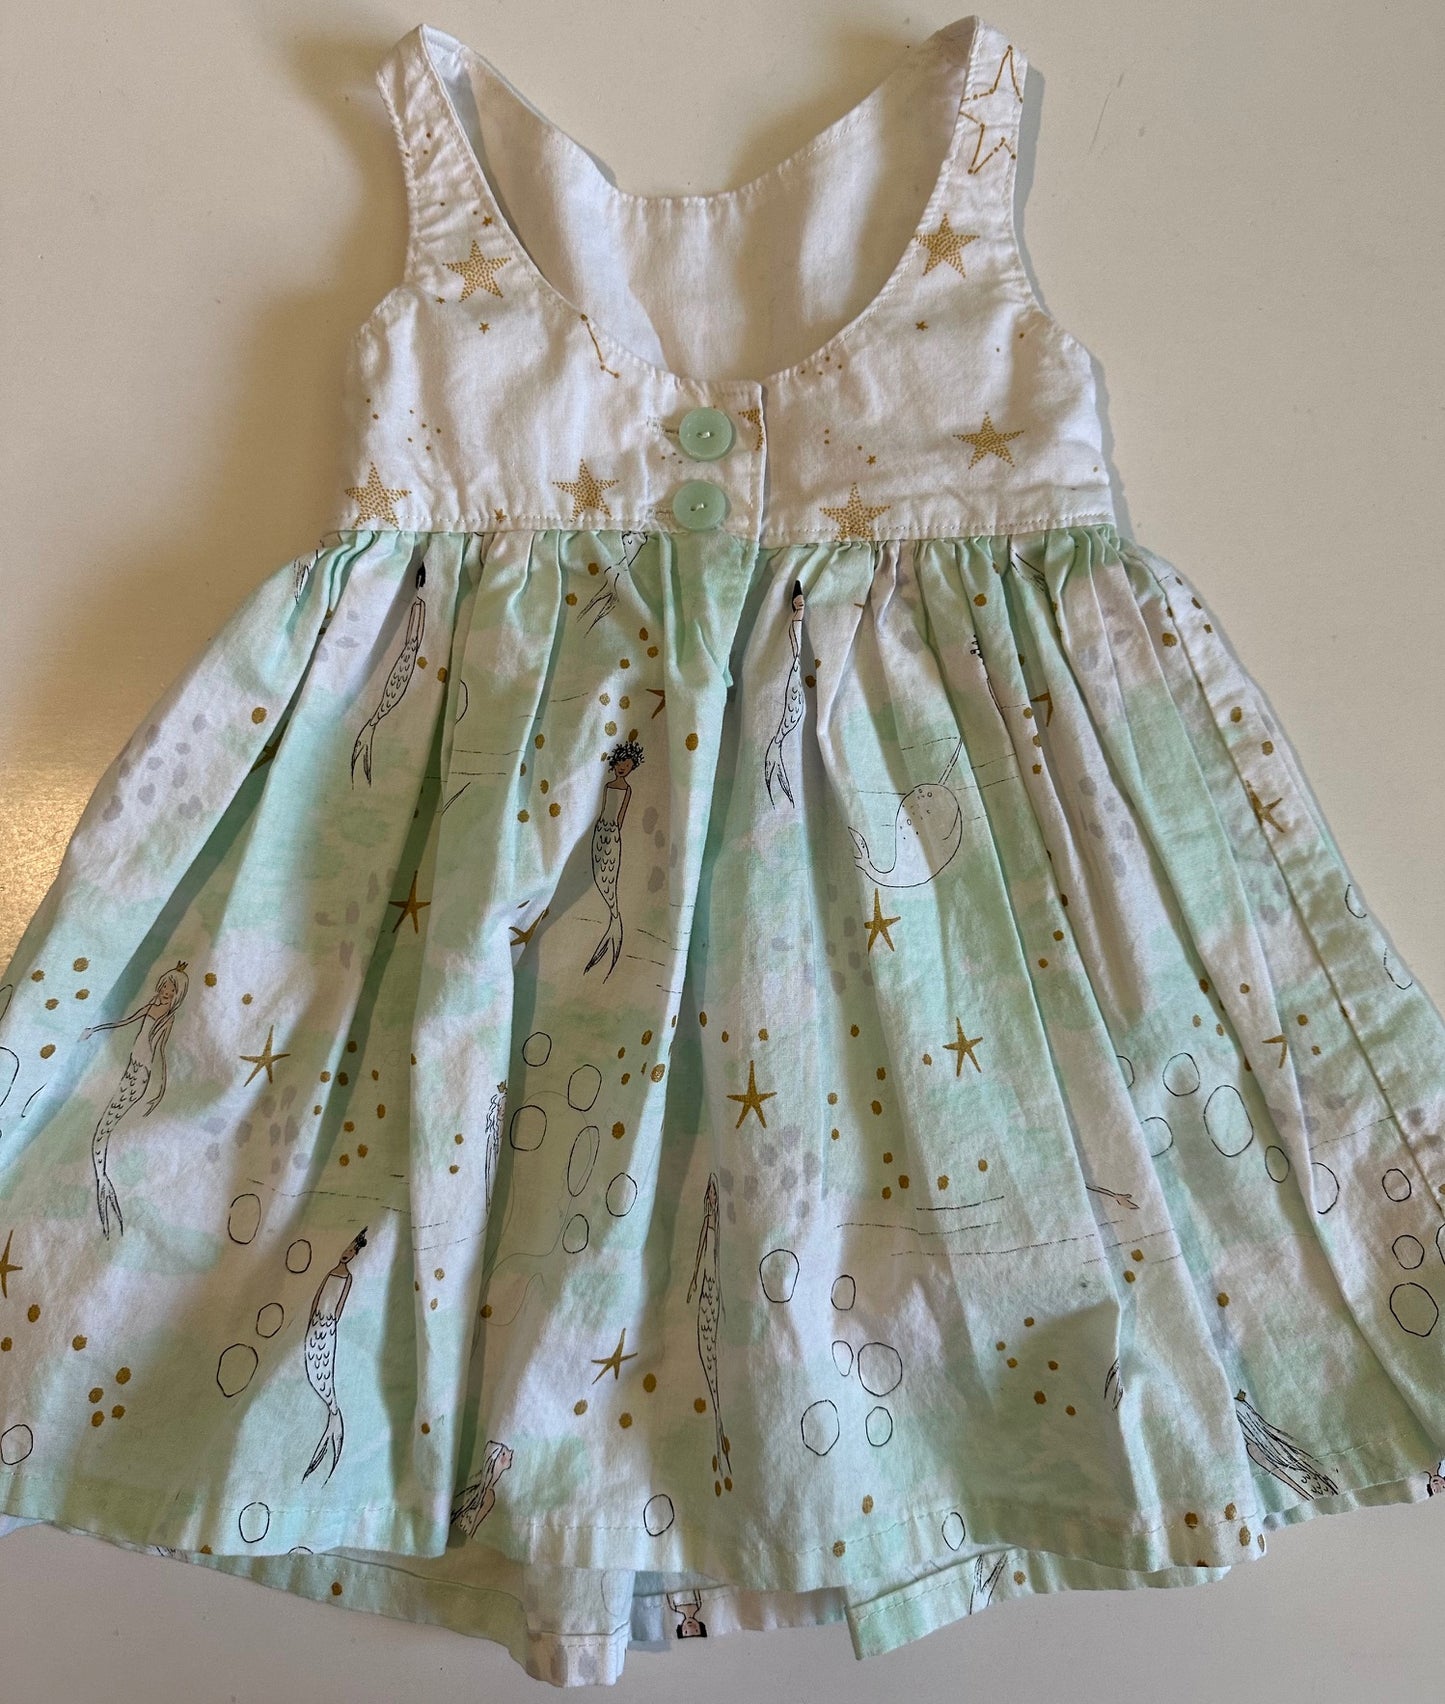 Unknown Brand, White and Pale Teal Stars/Mermaids Dress - 18-24 Months